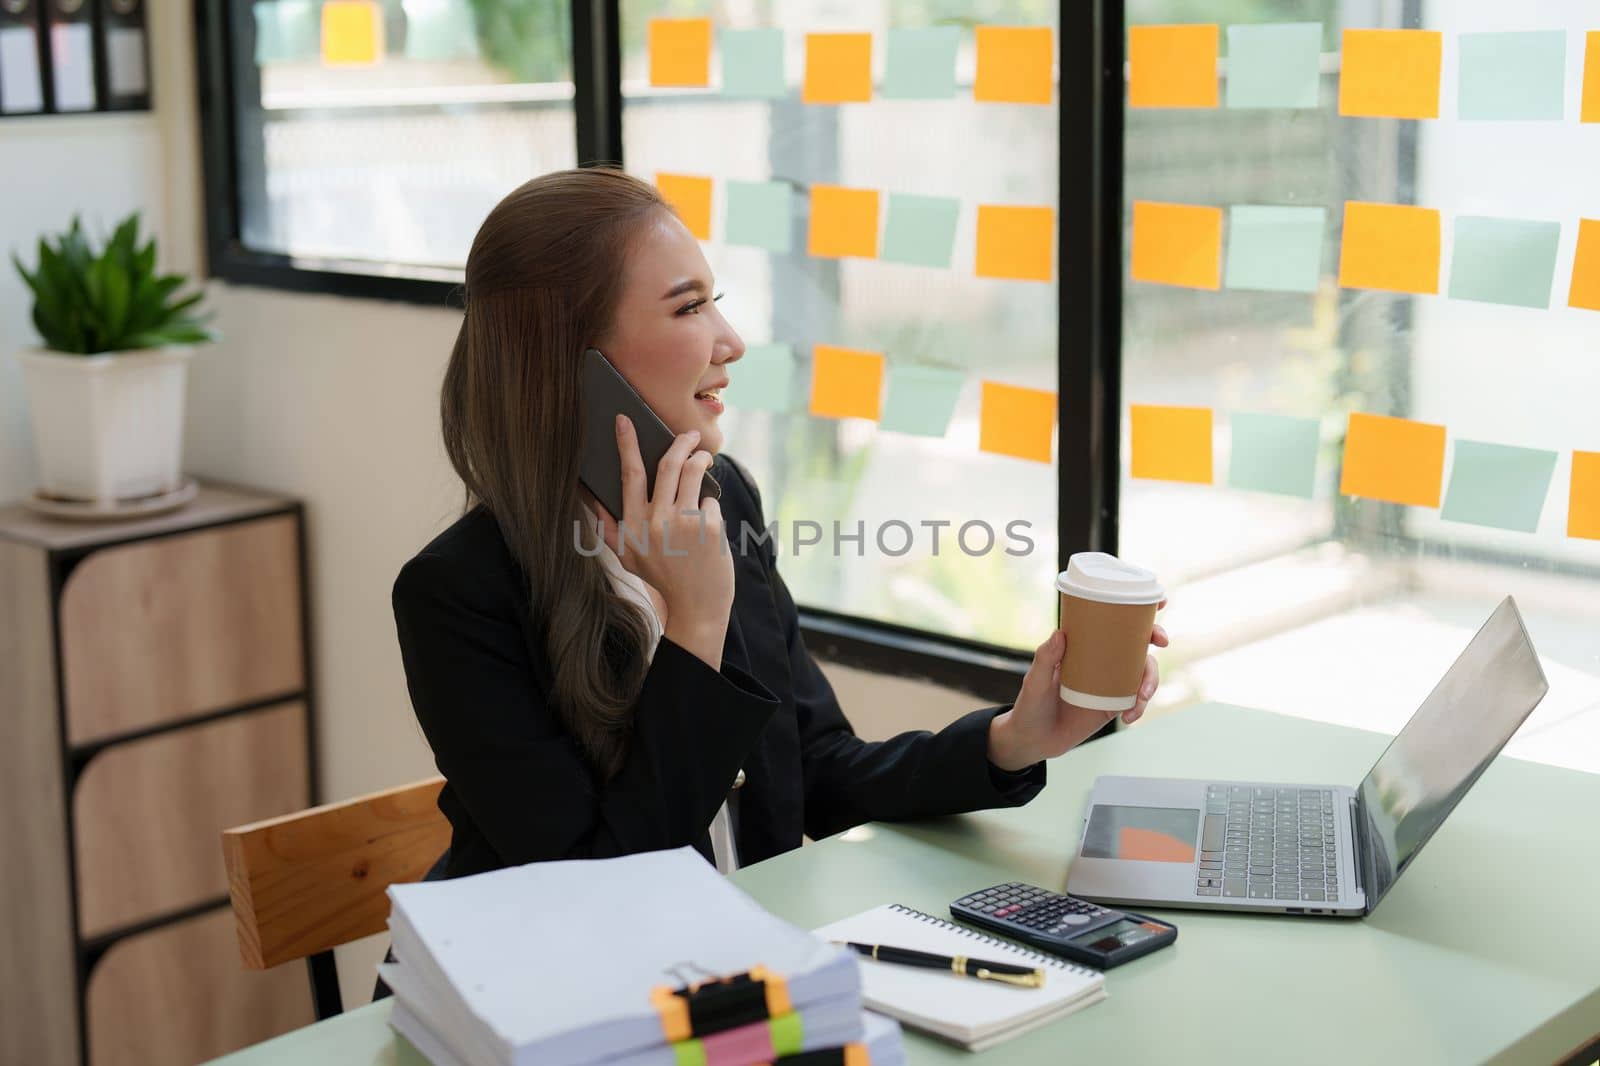 Business Documents, Auditor businesswoman searching document legal prepare paperwork and report for analysis TAX time, accountant Documents data contract partner deal in workplace.